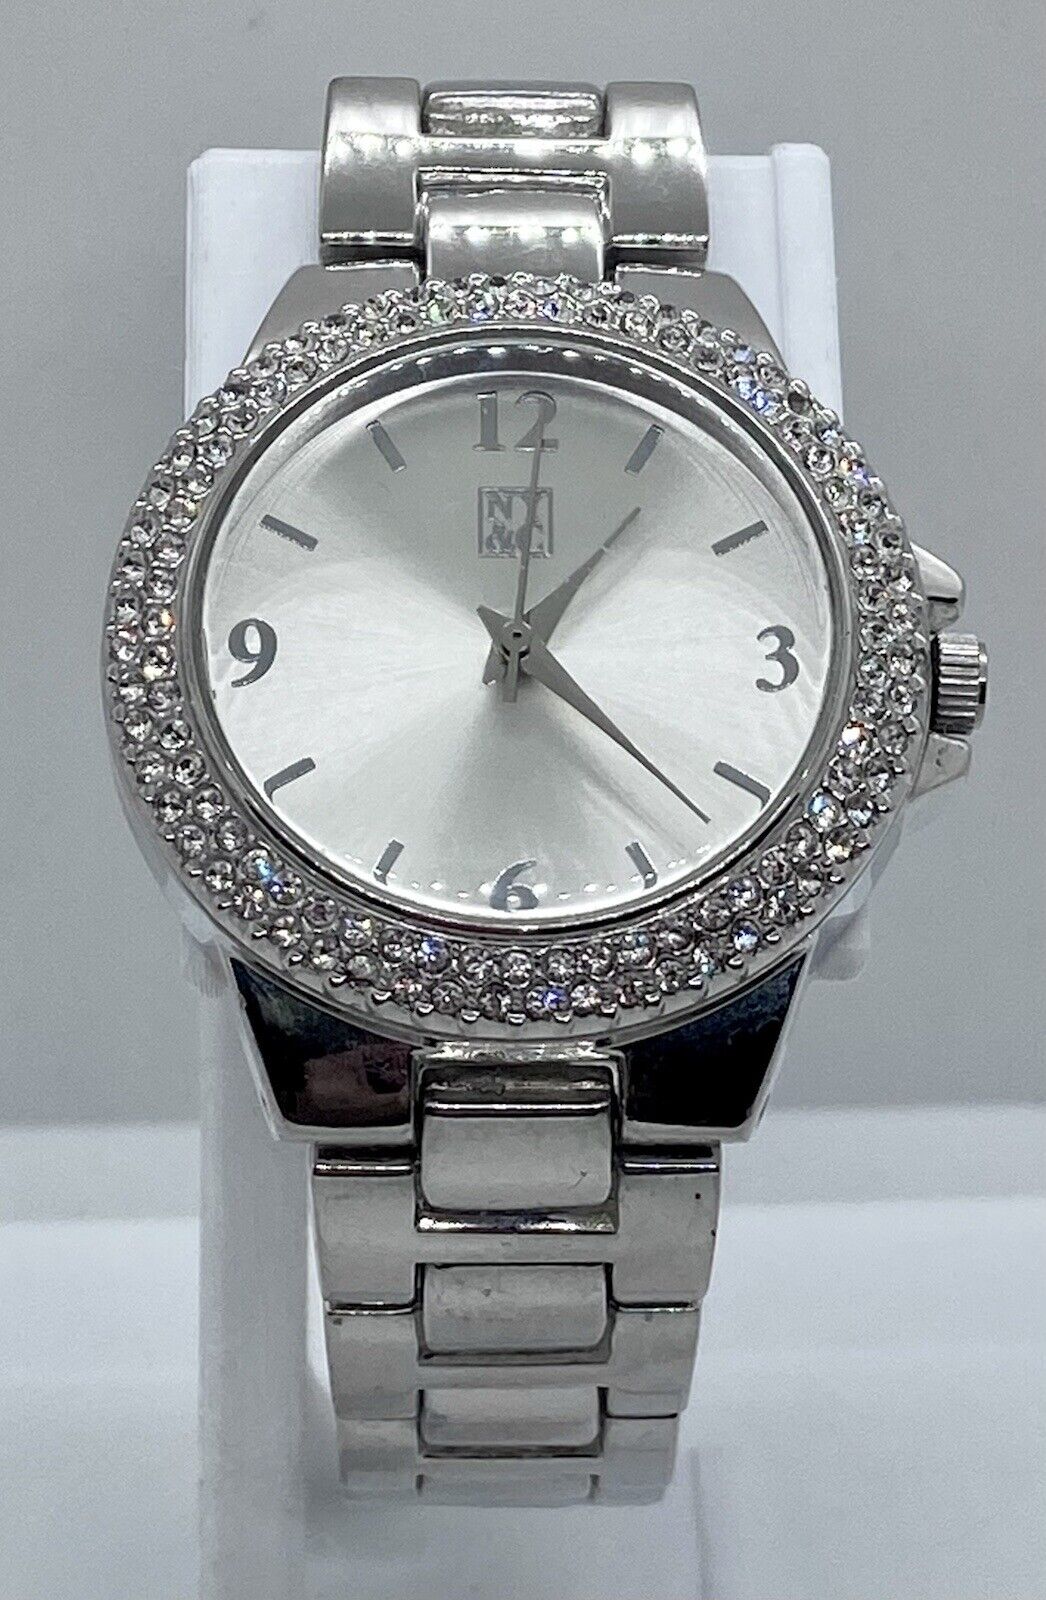 New NY&C LADIES WATCH With New Battery Bold Iced Dial Silver 7” Metal Band